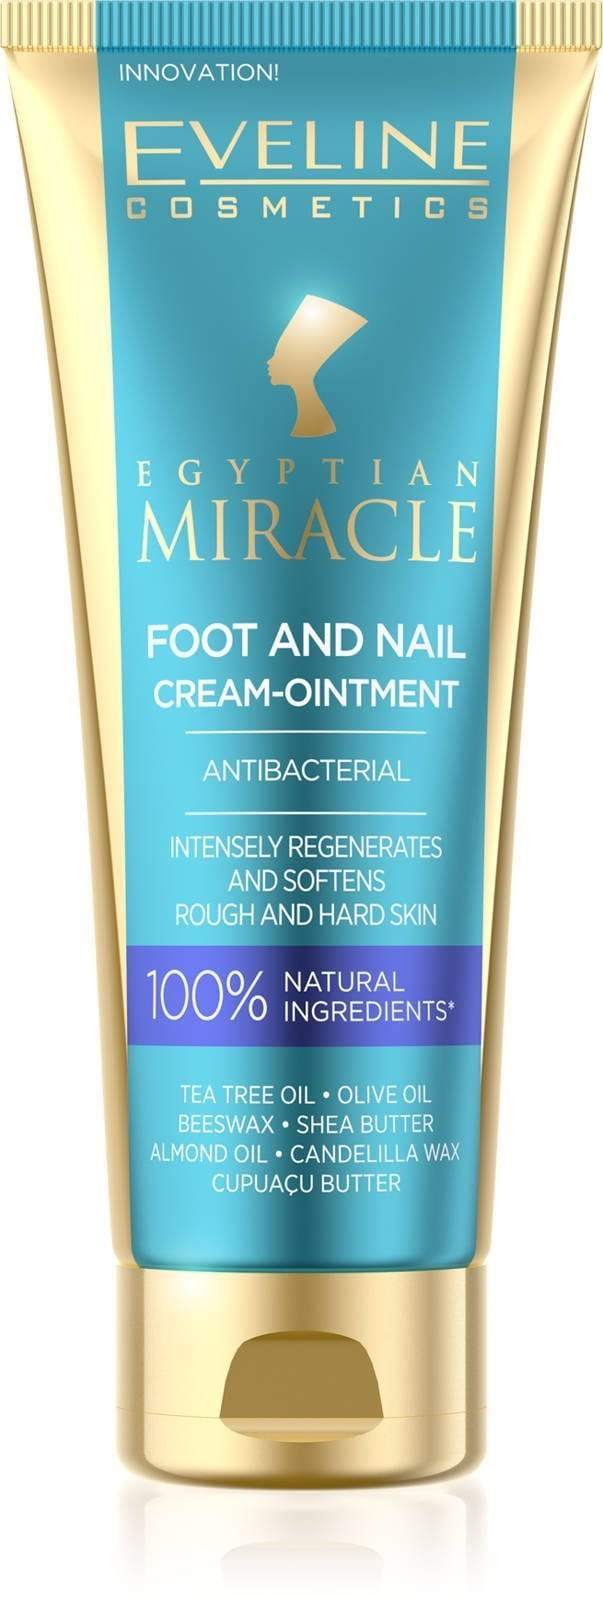 Eveline Egyptian Miracle Foot and Nail Cream Ointment Minoustore